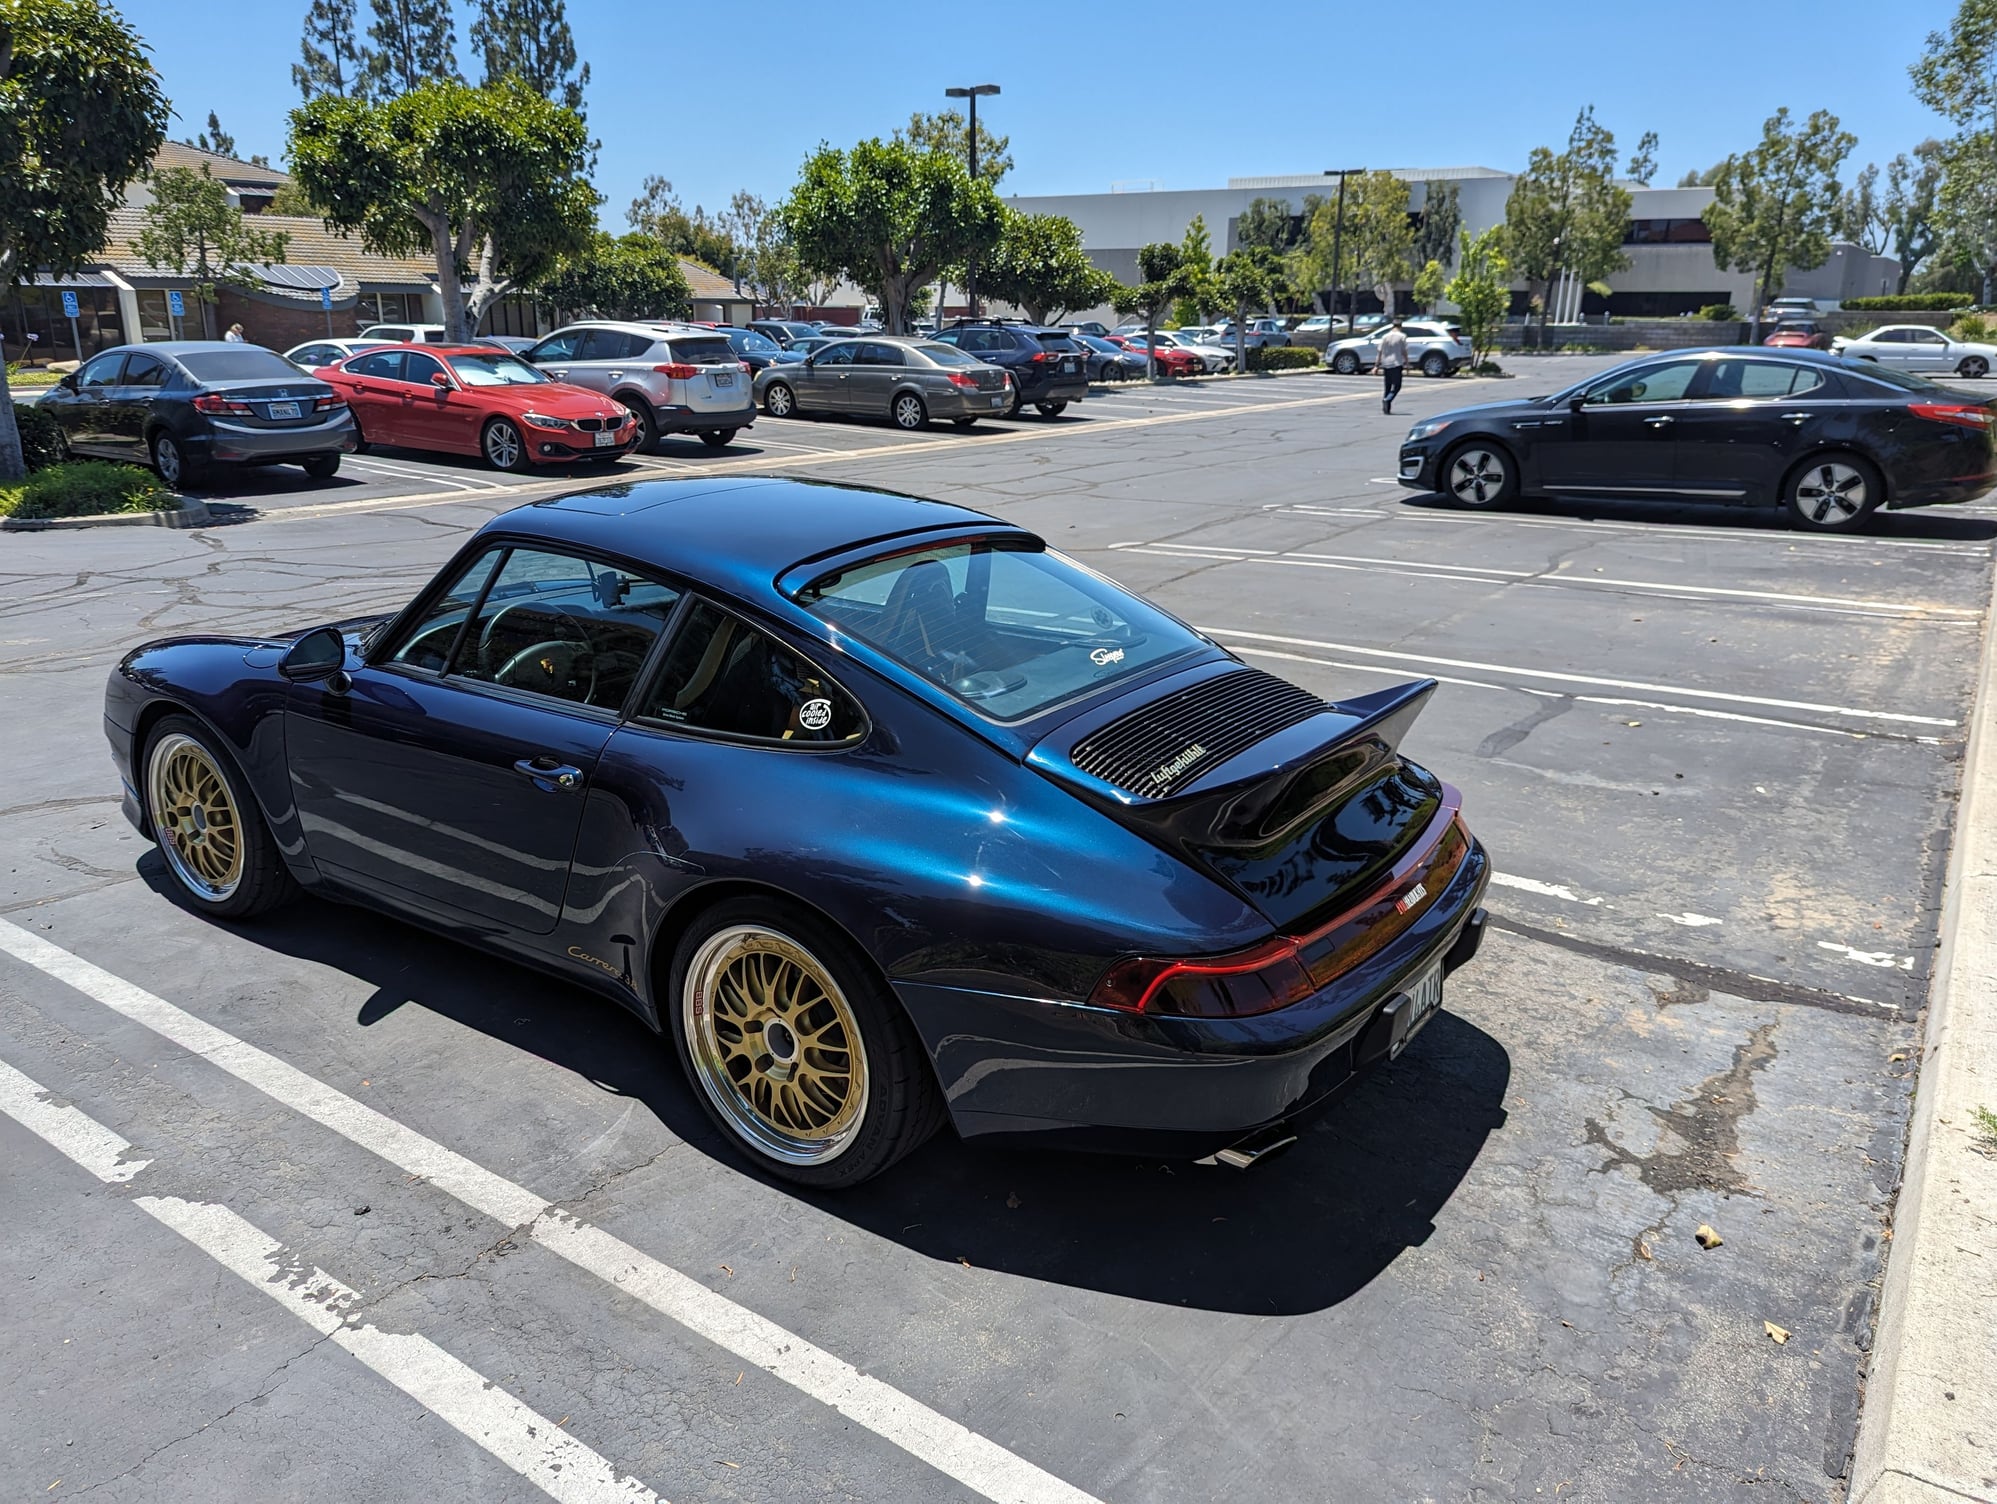 1997 Porsche 911 - 1997 Ocean Blue 993 C2 with 3.8 Motor & Tan Hounds Tooth Interior - Used - VIN WP0AA299VS322242 - 34,250 Miles - 6 cyl - 2WD - Manual - Coupe - Blue - Brea, CA 92821, United States